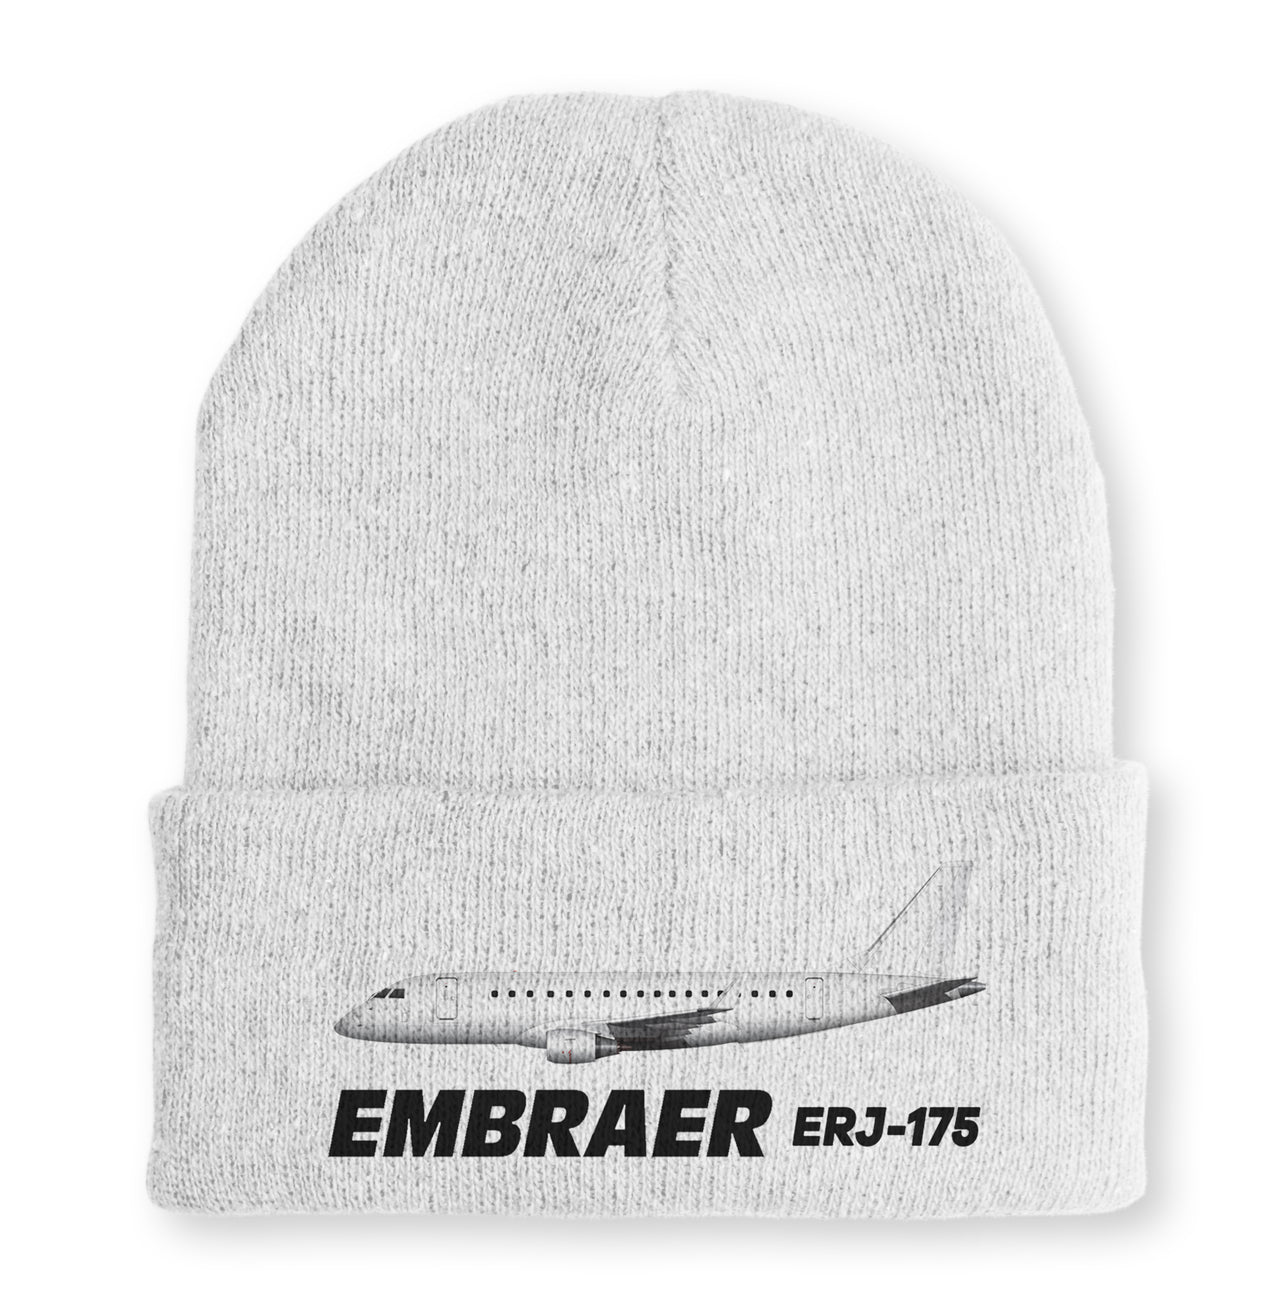 The Embraer ERJ-175 Embroidered Beanies